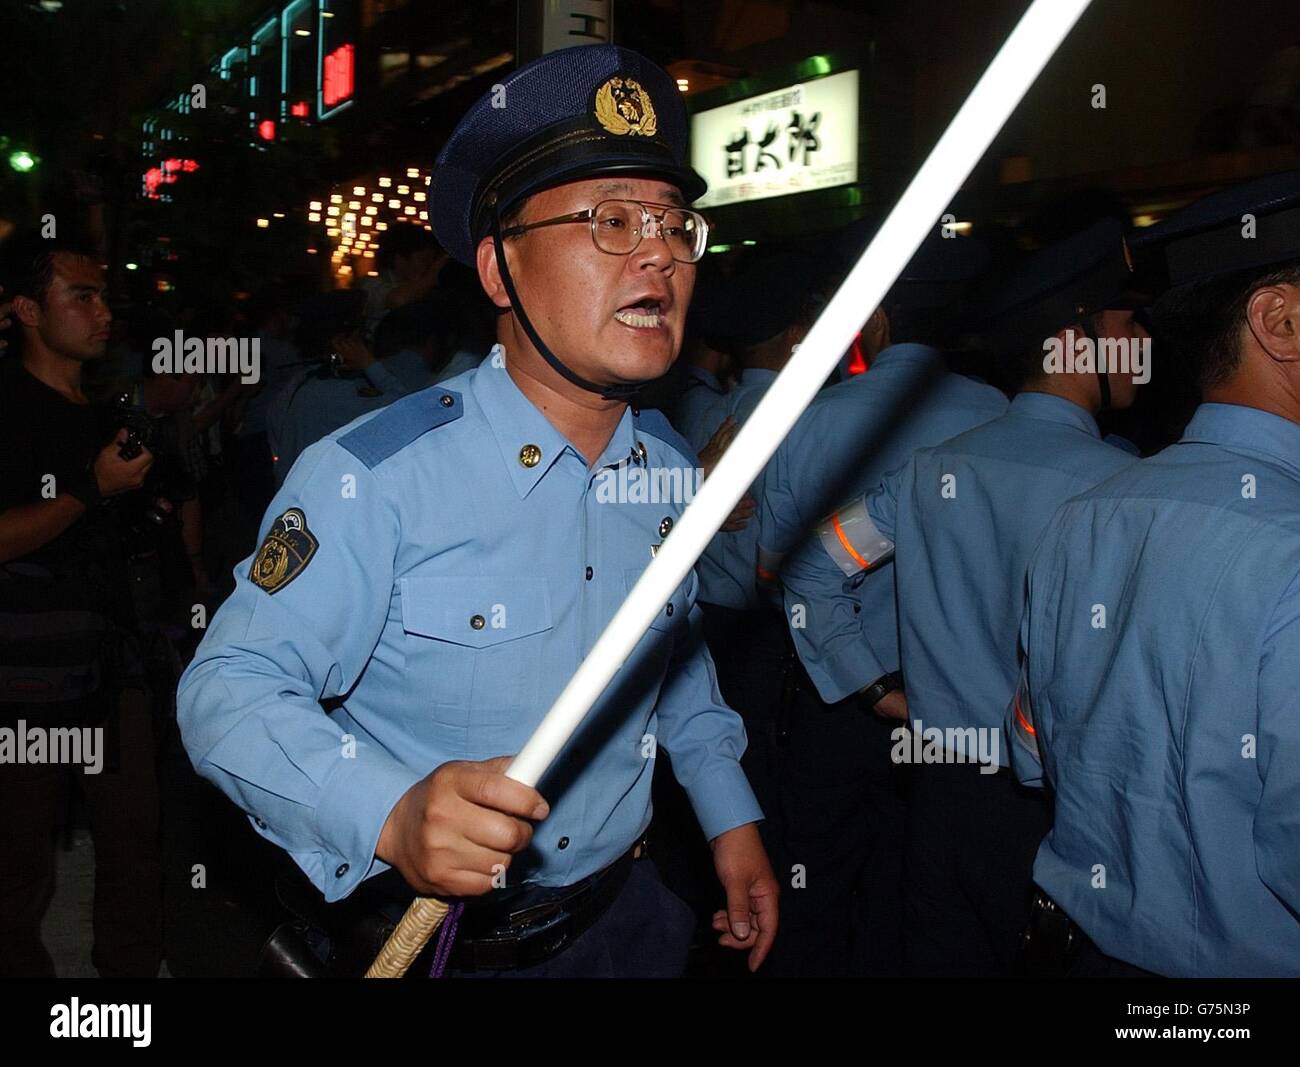 A Japanese policeman with a stick like restrainer in the Roppongi area of Tokyo, Japan after fans celebrated Englands 1-0 win against Argentina. Stock Photo